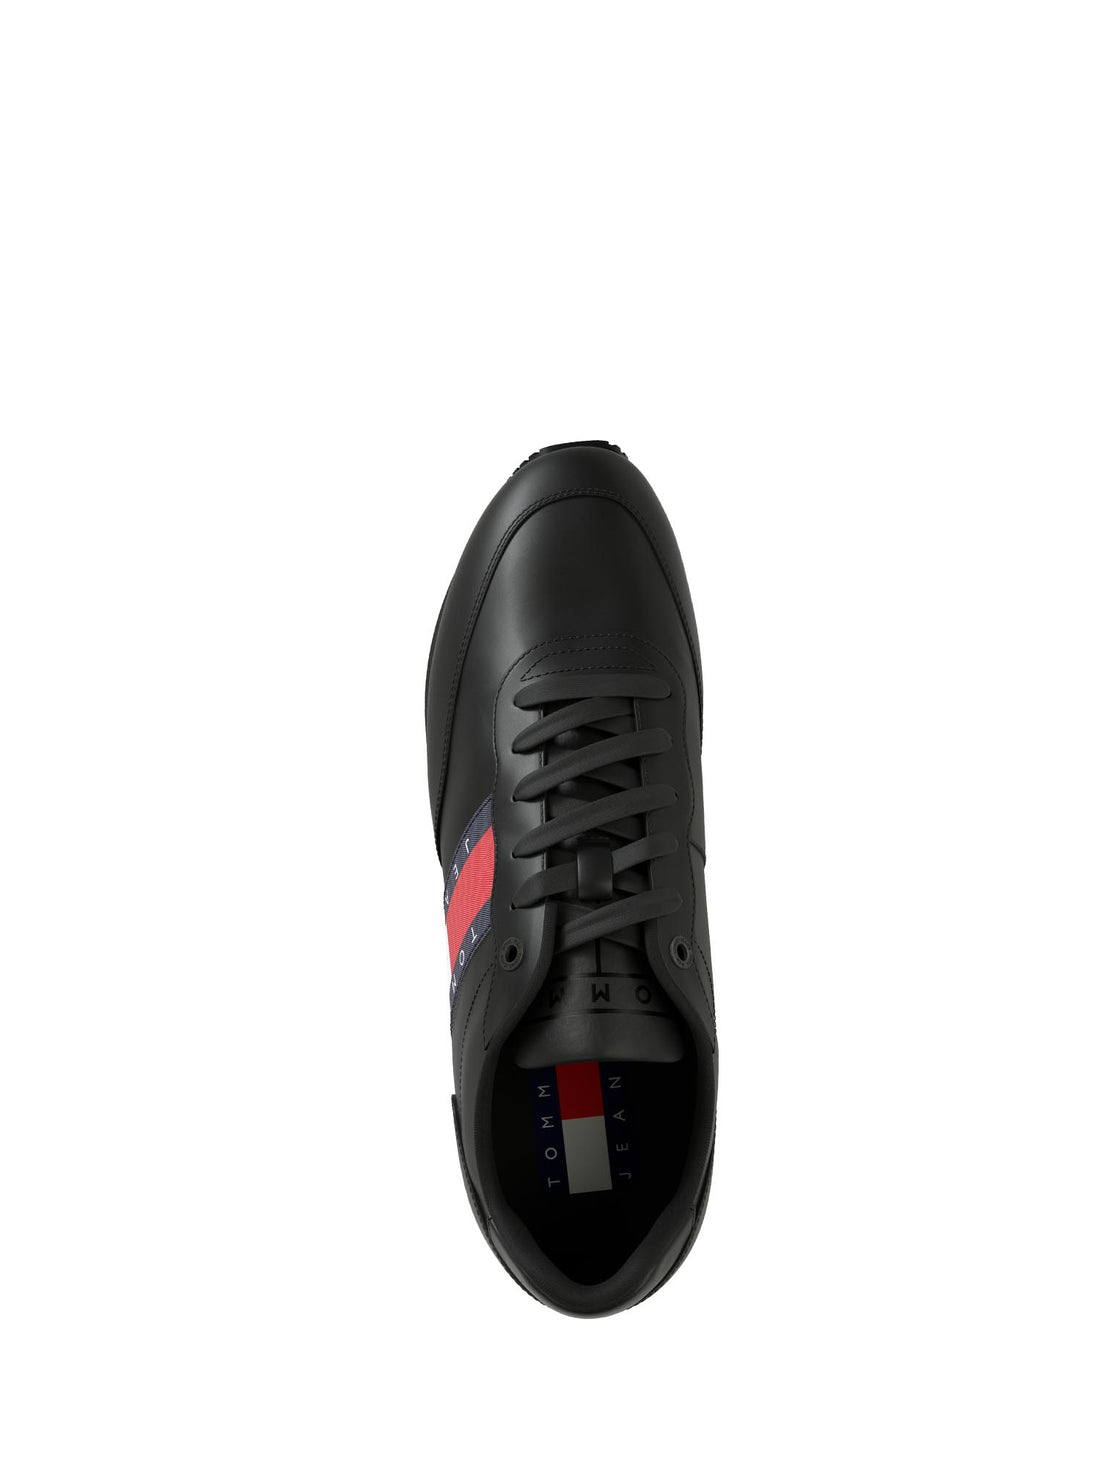 Sneakers Nero Tommy Jeans